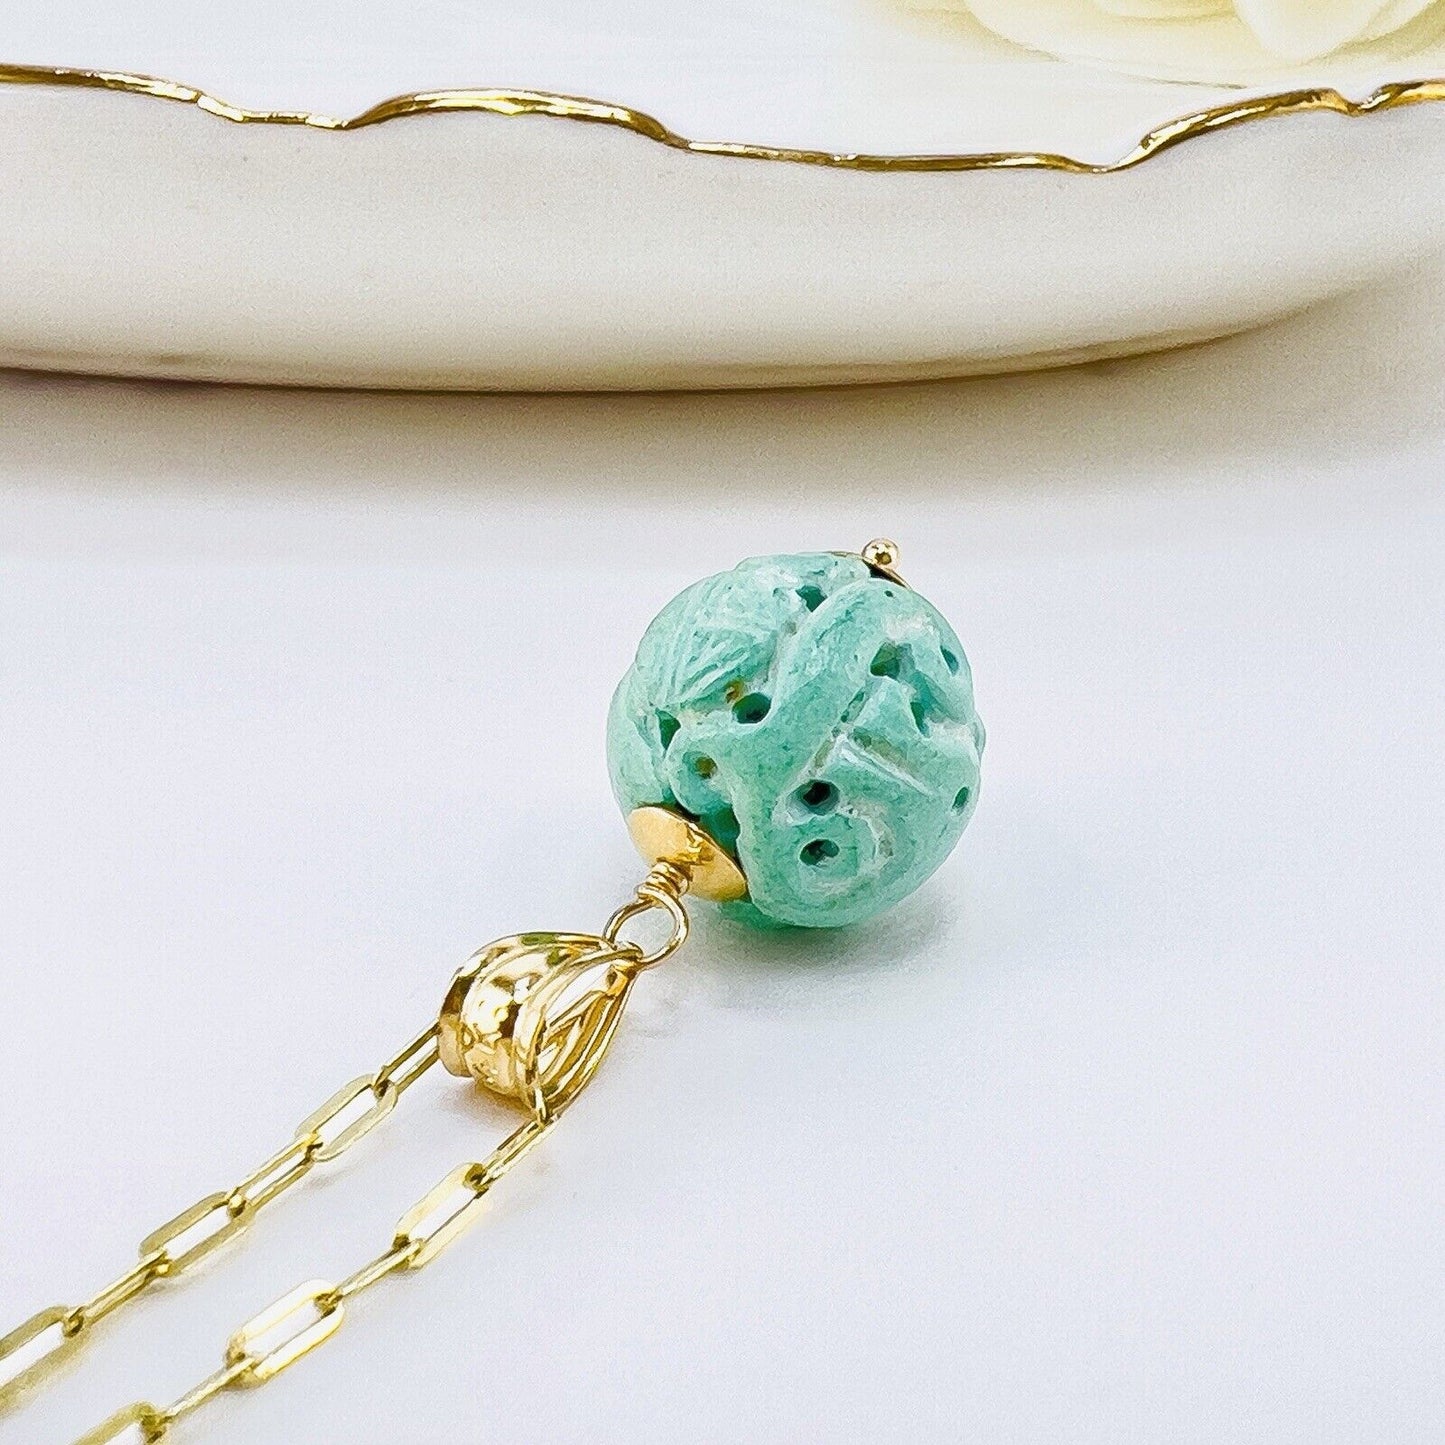 Natural Turquoise "Long Life" Carved 10.5mm 14k Yellow Gold Pendant, New